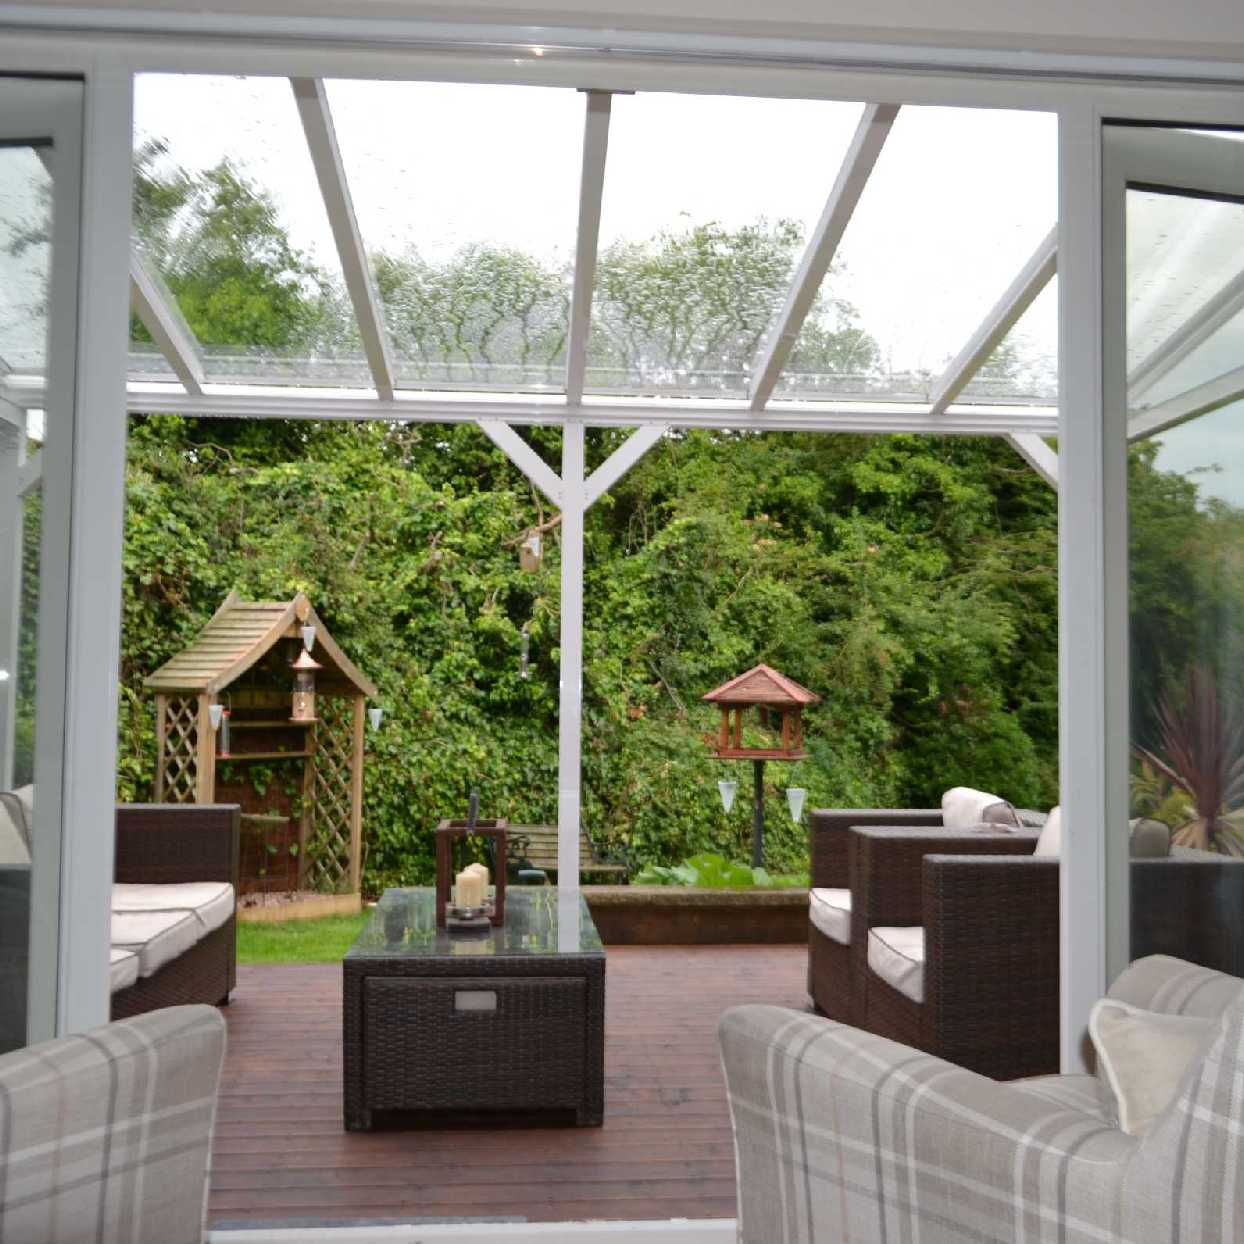 Buy Omega Smart Free-Standing, White MonoPitch Roof Canopy with 6mm Glass Clear Plate Polycarbonate Glazing - 7.0m (W) x 4.0m (P), (8) Supporting Posts online today